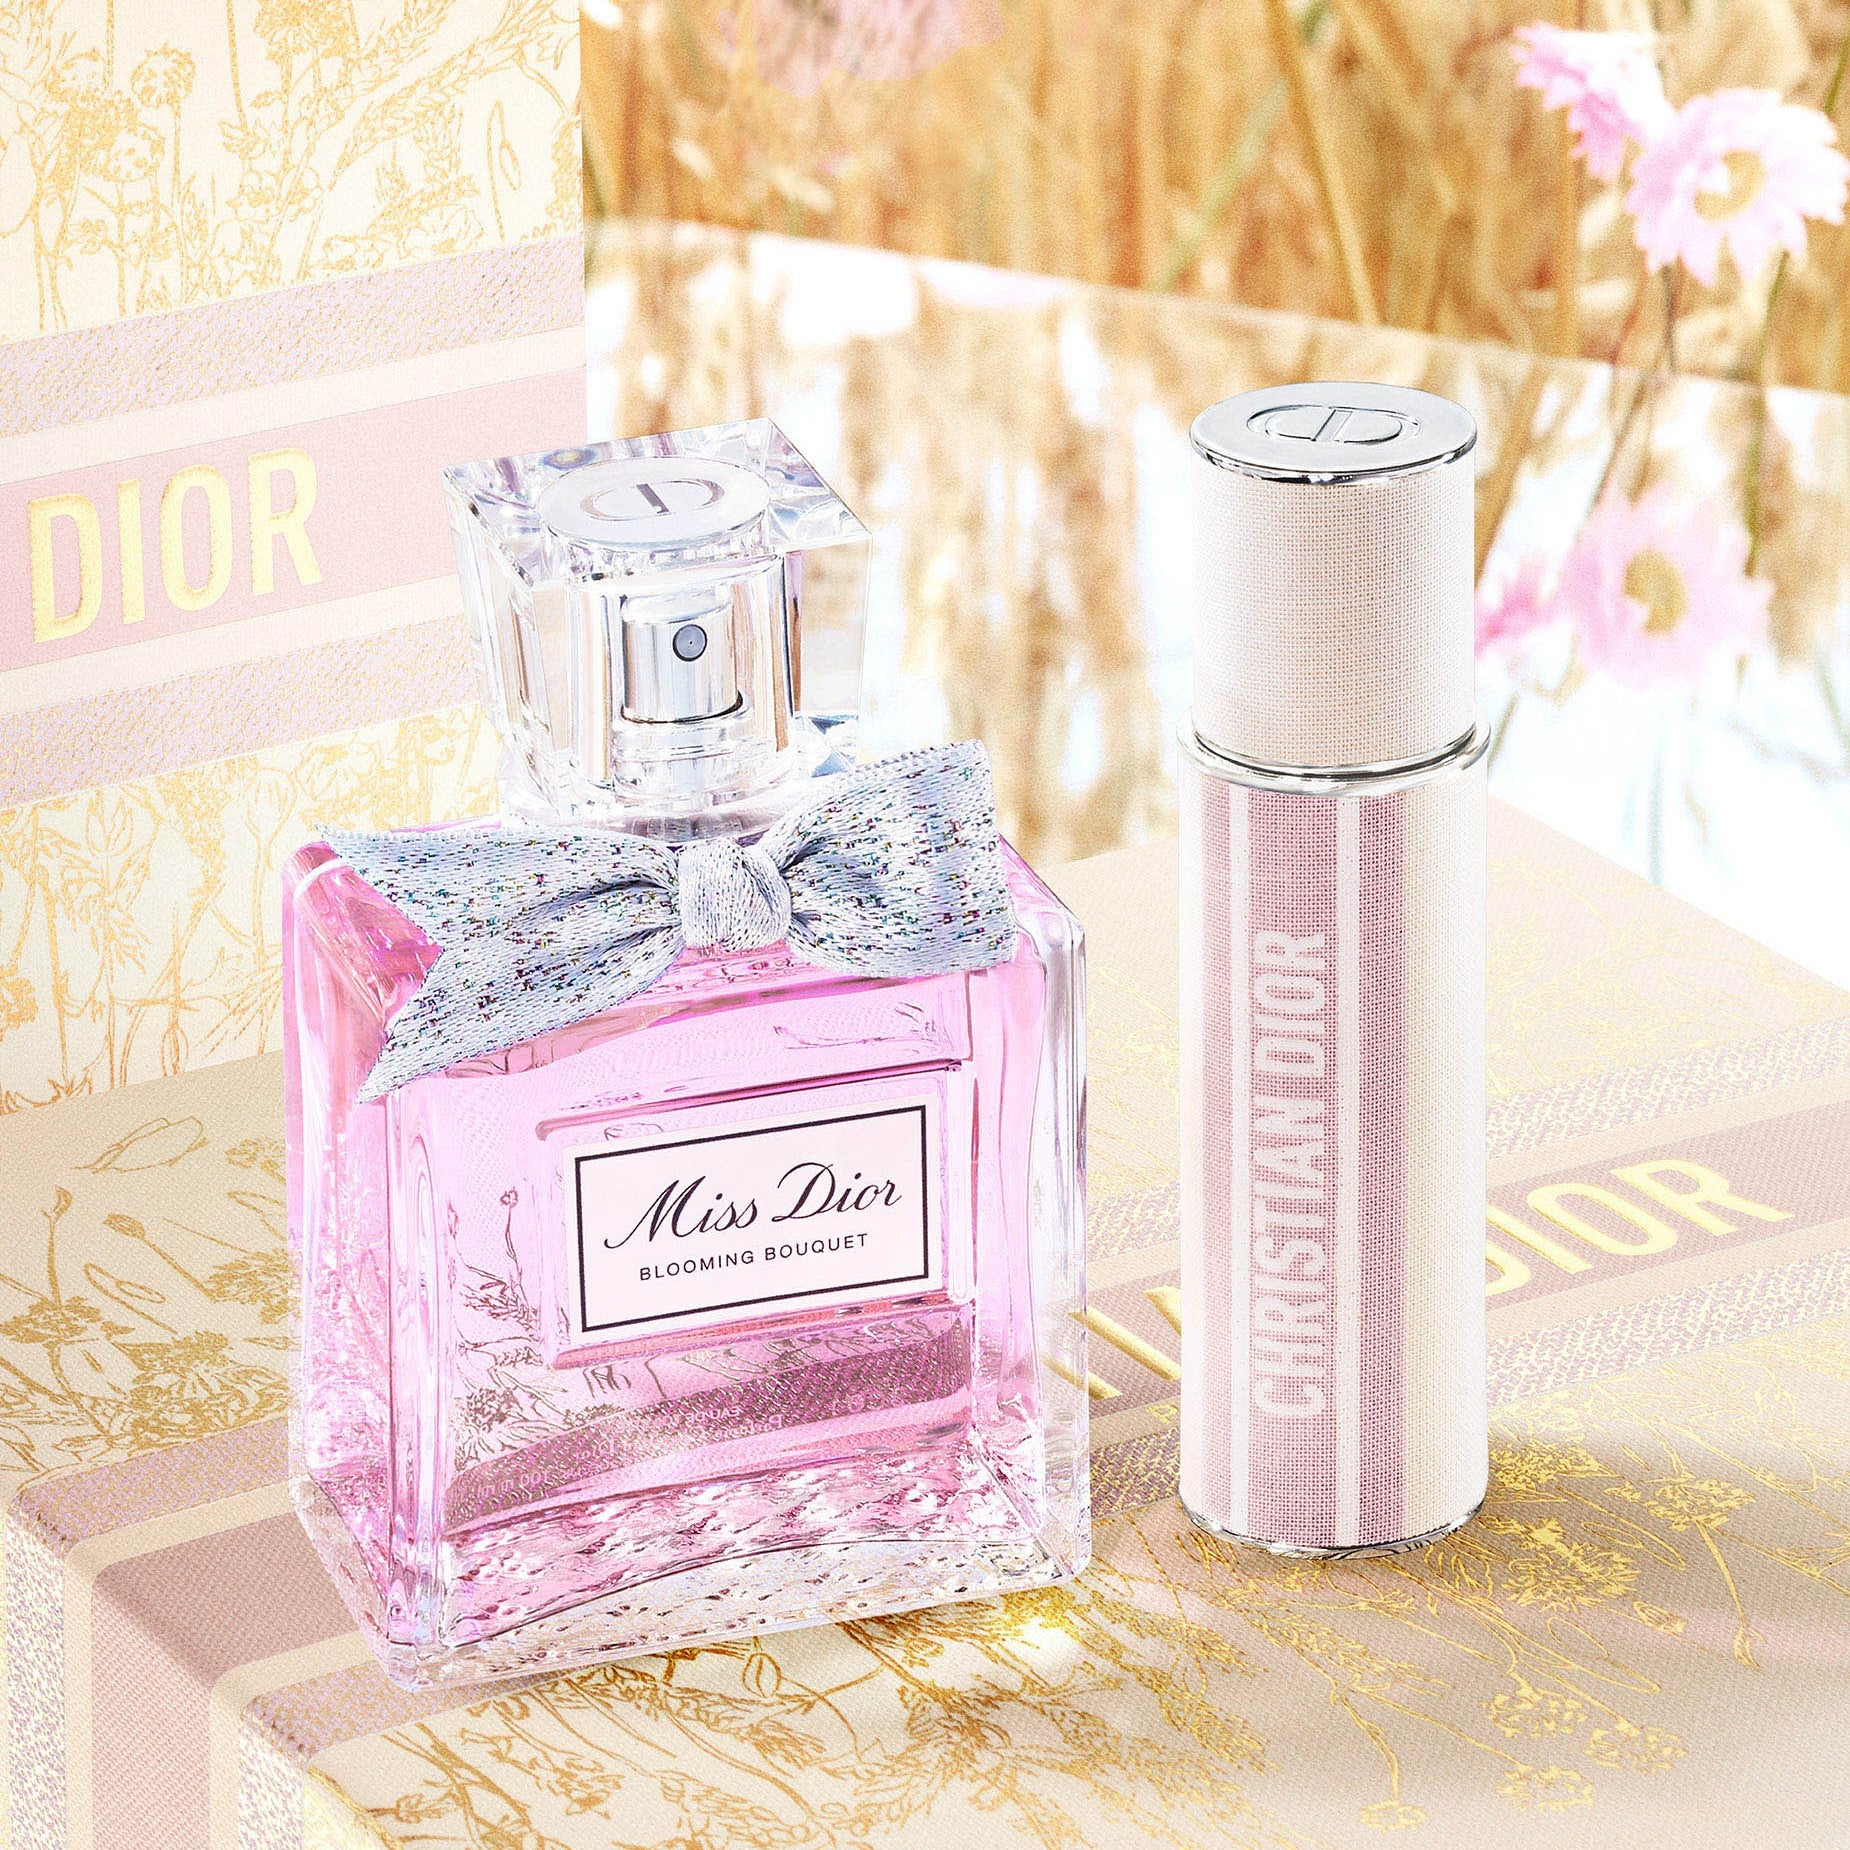 MISS DIOR BLOOMING BOUQUET MOTHER'S DAY SET | Eau de Toilette and Travel Spray - Limited Edition